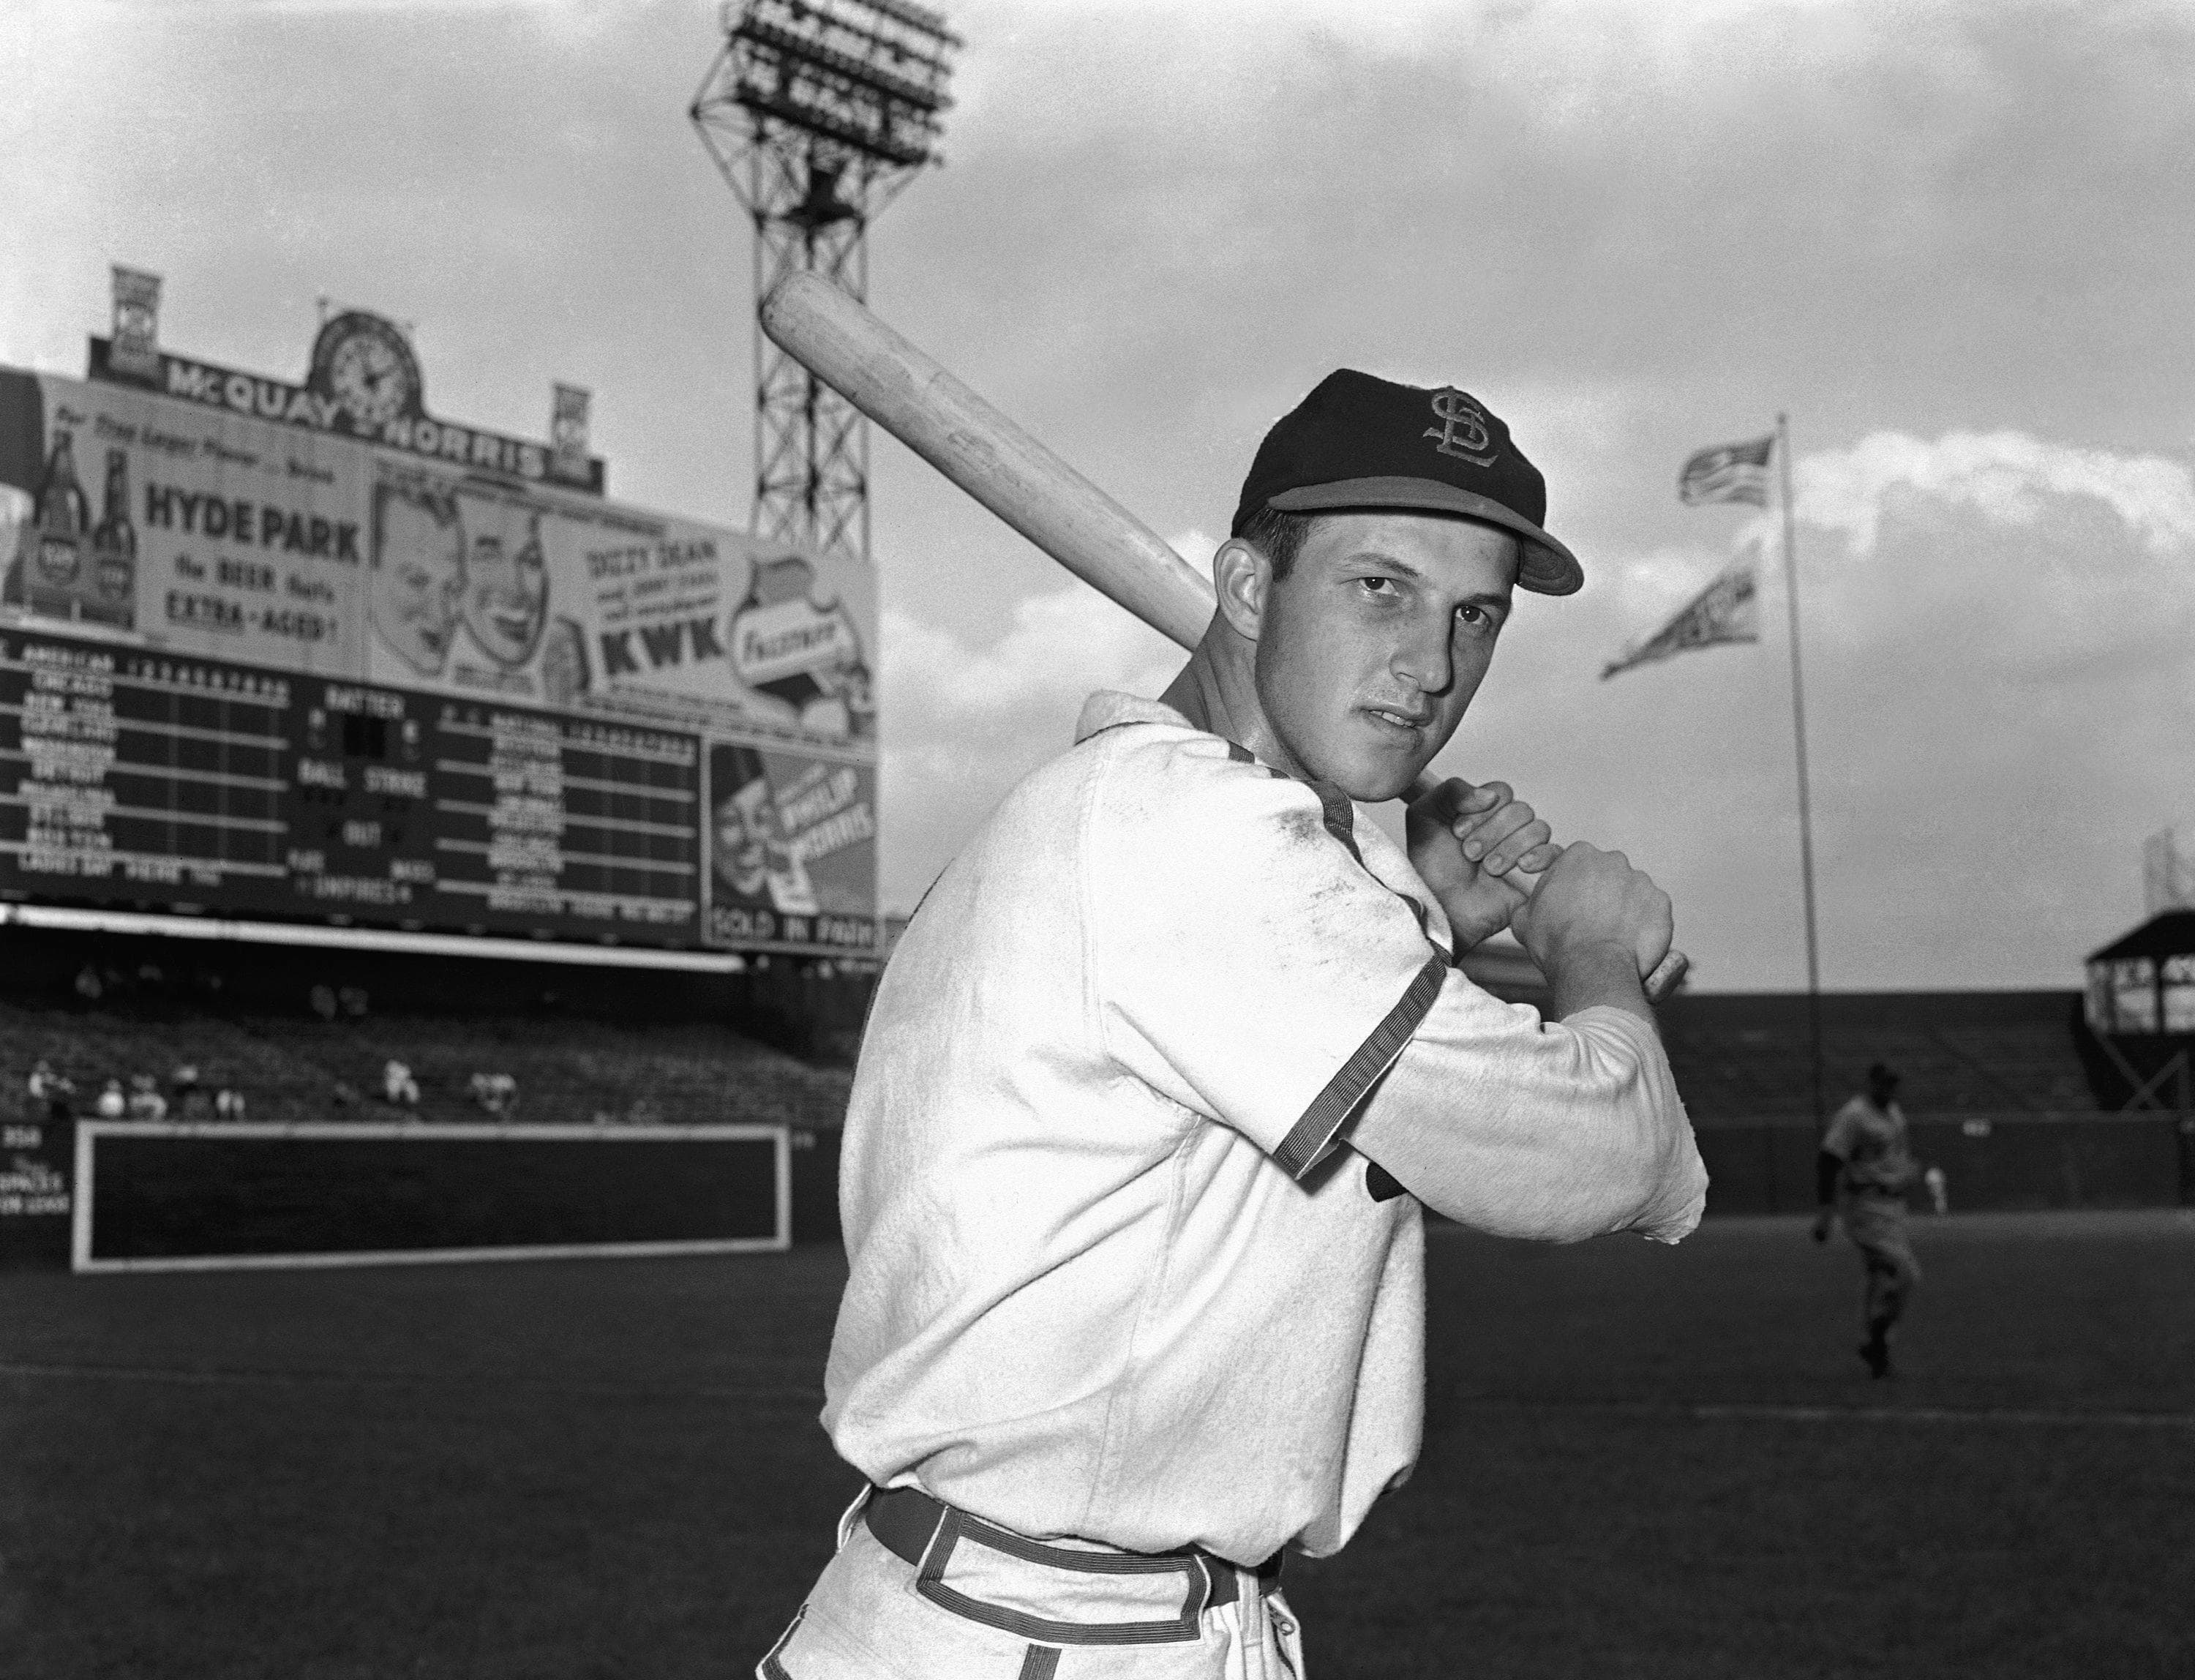 Marty Capodice's favorite player was St. Louis Cardinals great Stan Musial. (Edward Kitch/AP)